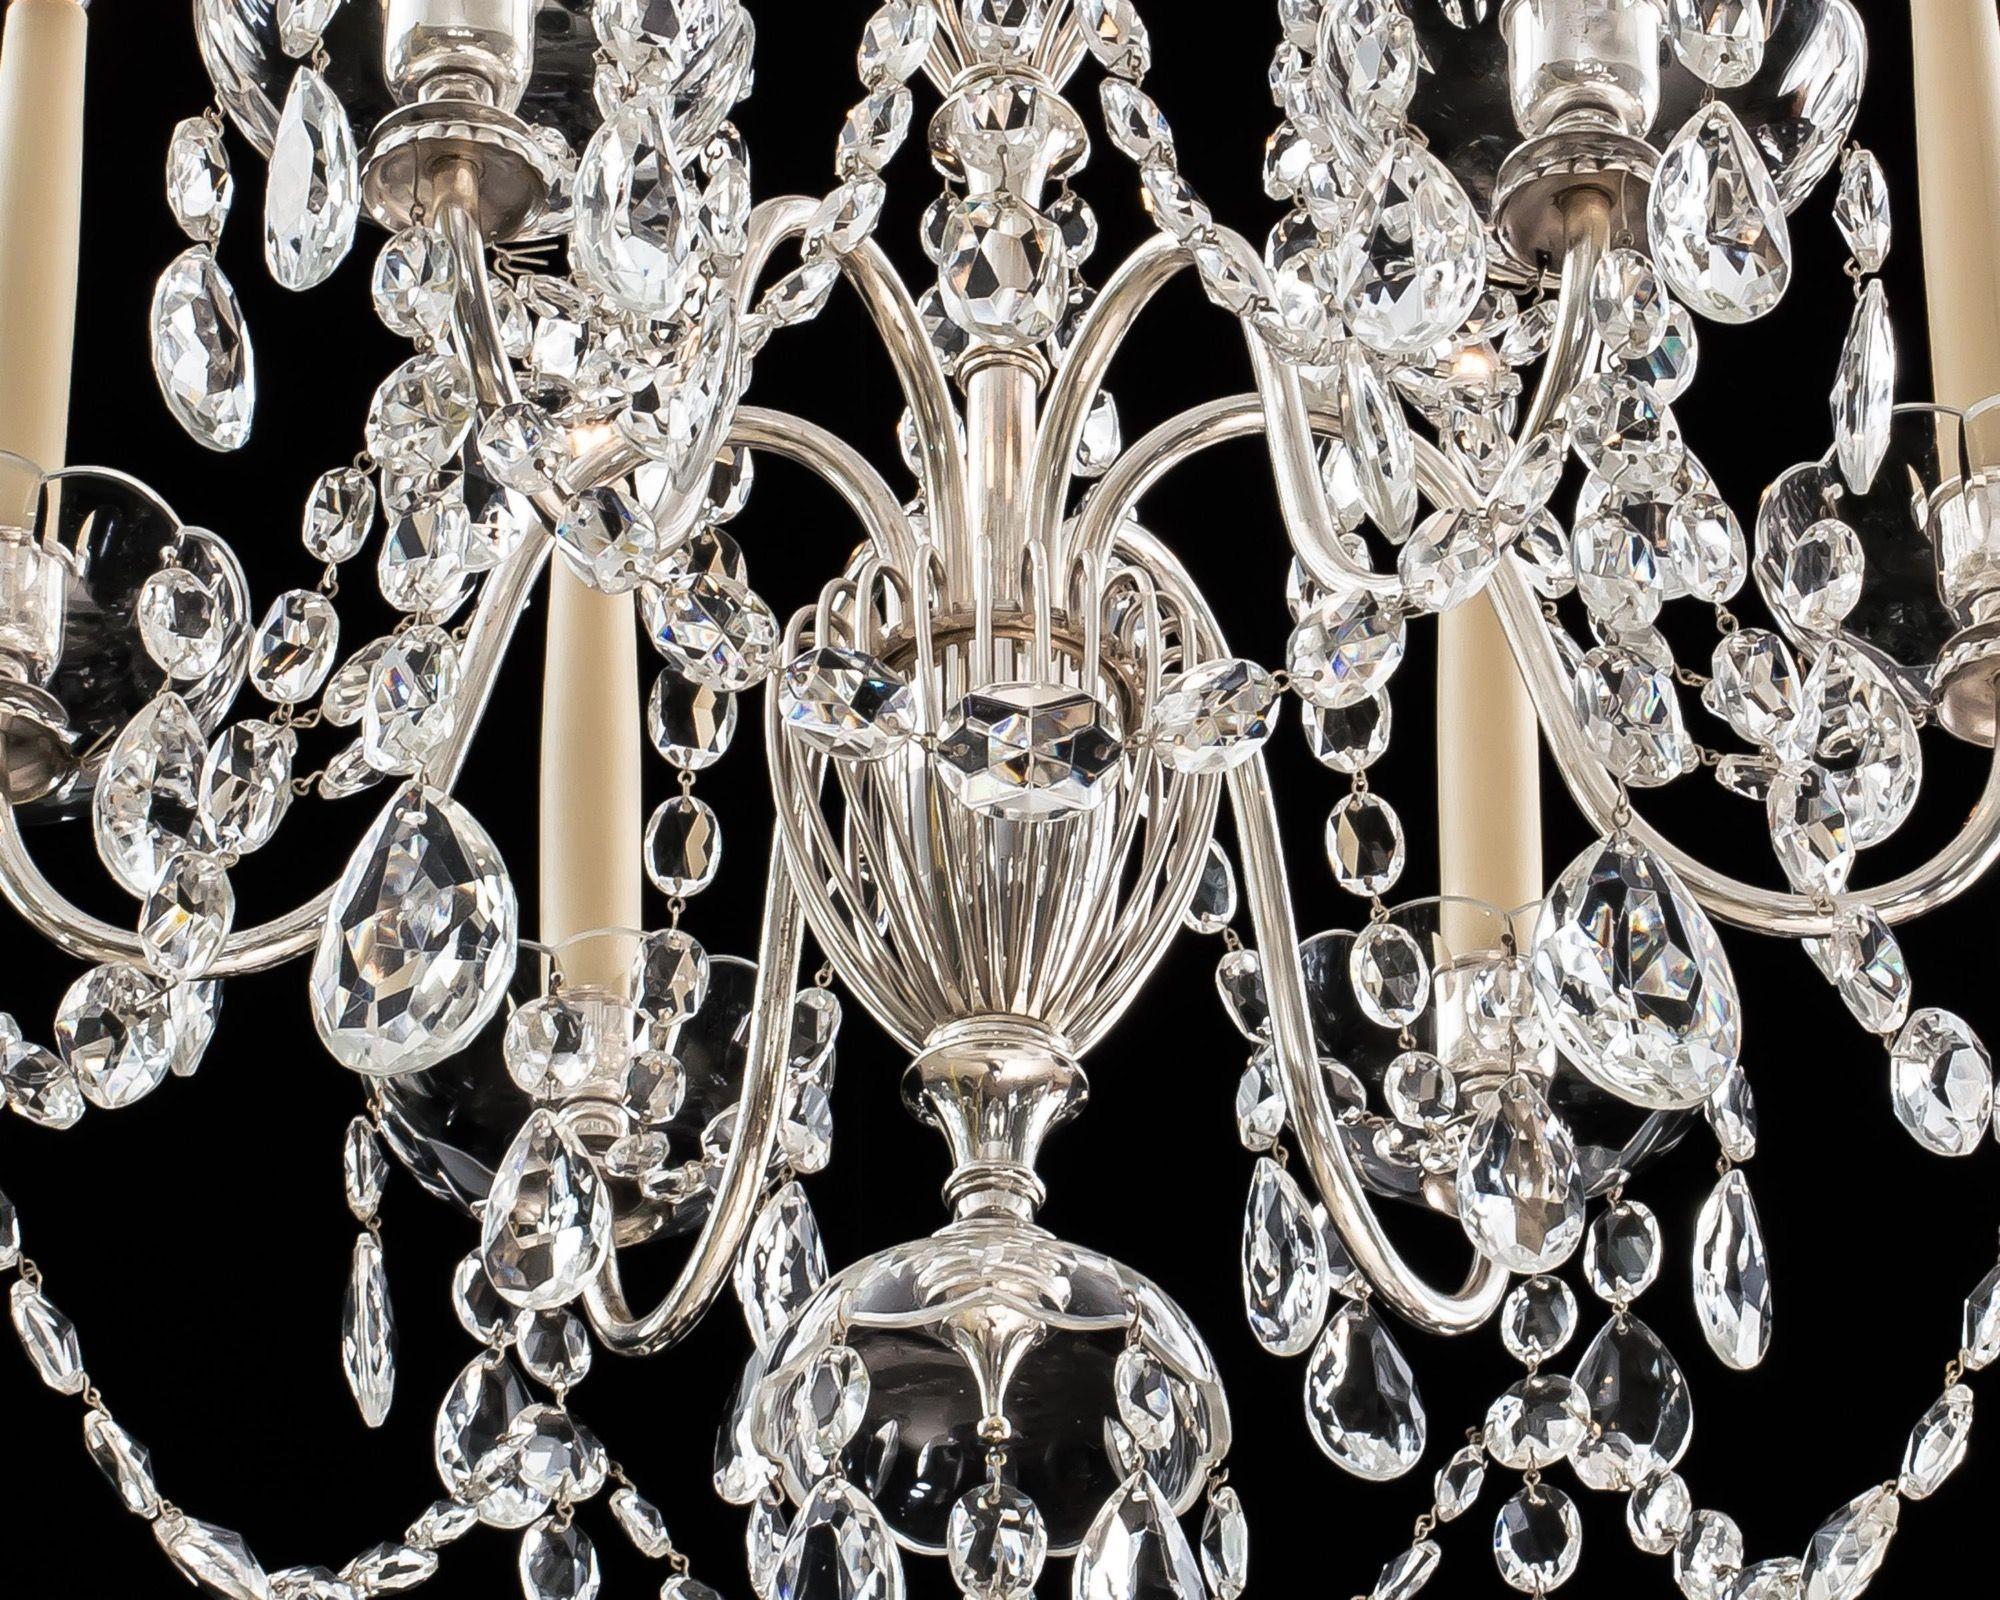 The baluster stem centred by a spiral urn and corresponding canopy, with cascading chains. The candle branches are swaged with drapes and fitted with drop hung pans.